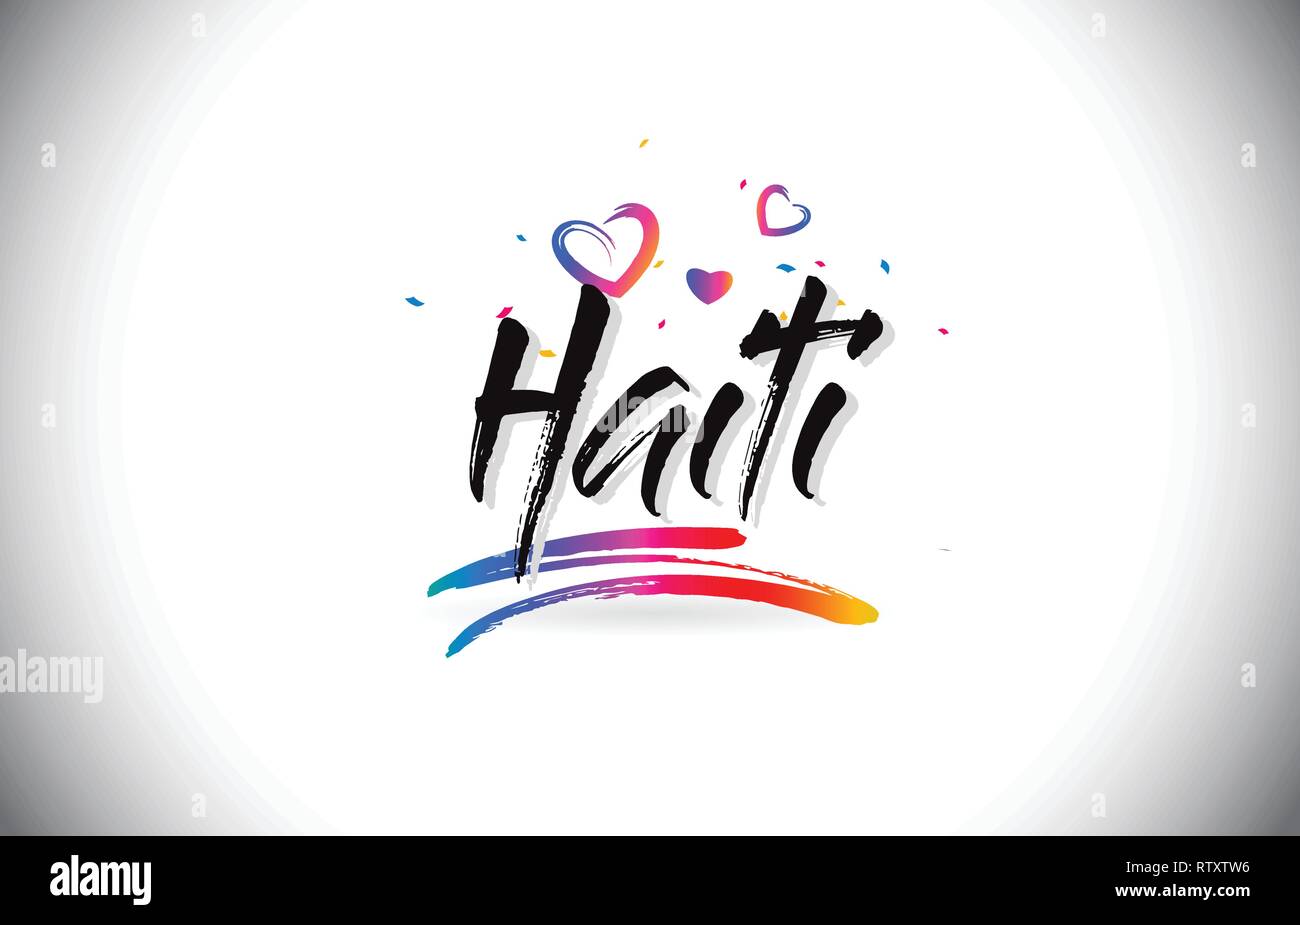 Haiti Welcome To Word Text with Love Hearts and Creative Handwritten Font Design Vector Illustration. Stock Vector